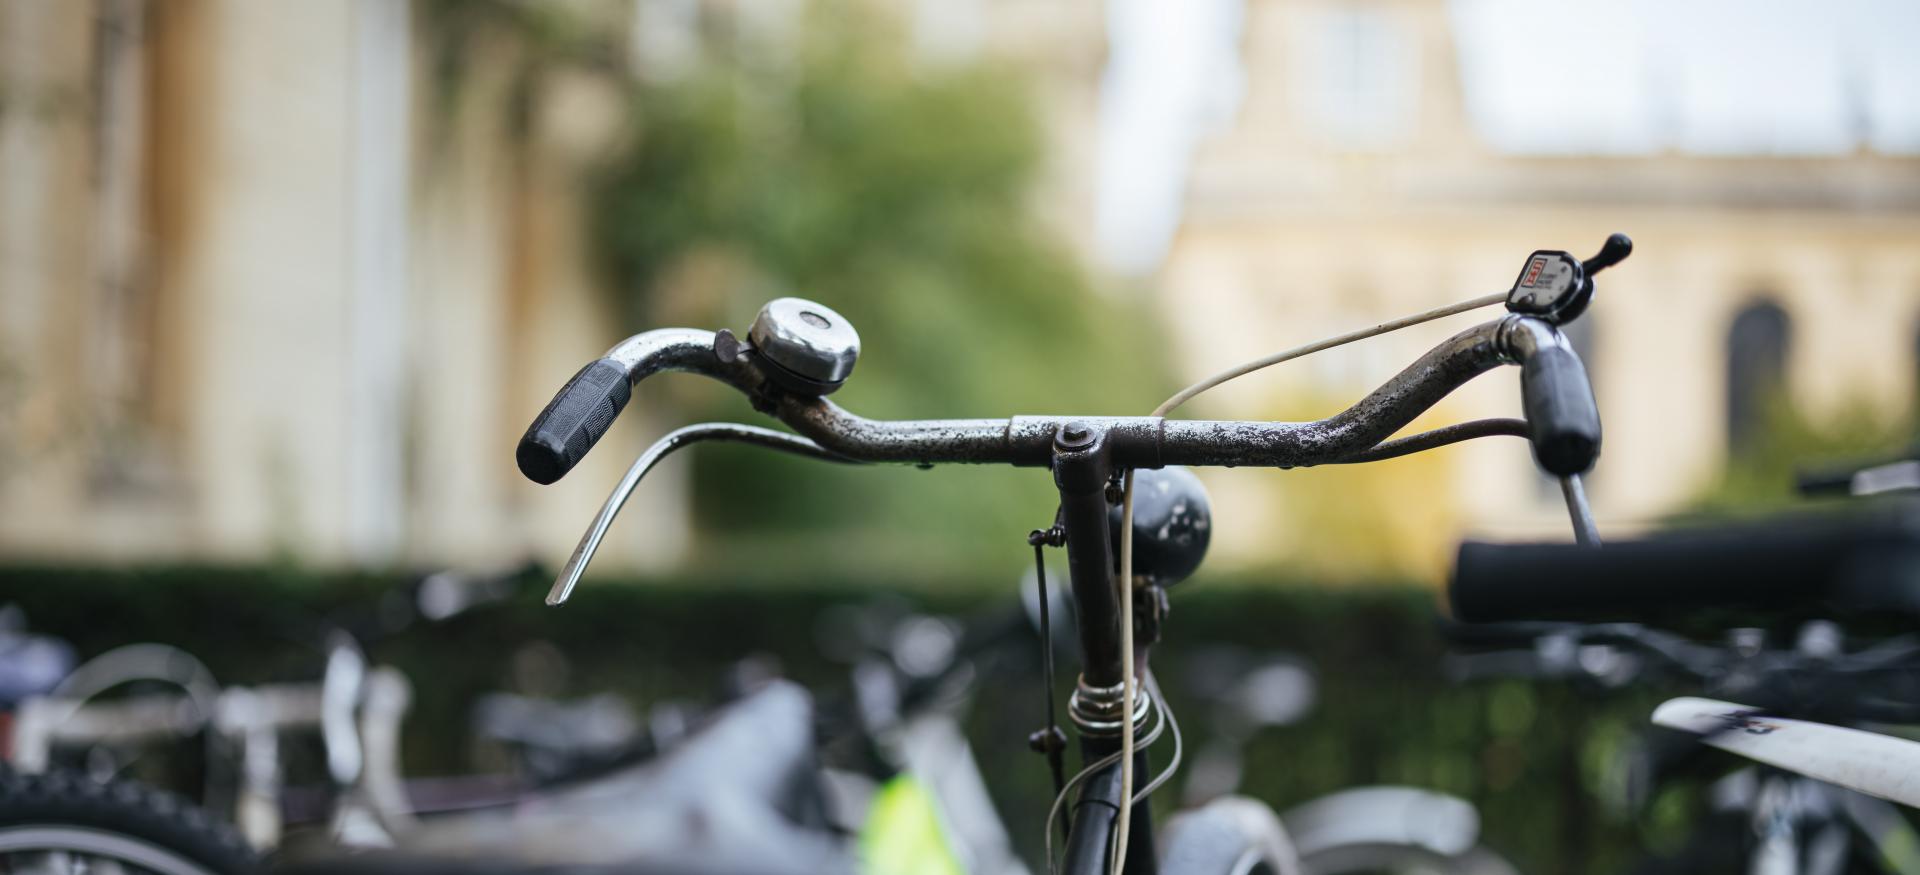 The front of a bicycle in focus, with Trinity's Chapel in the background.